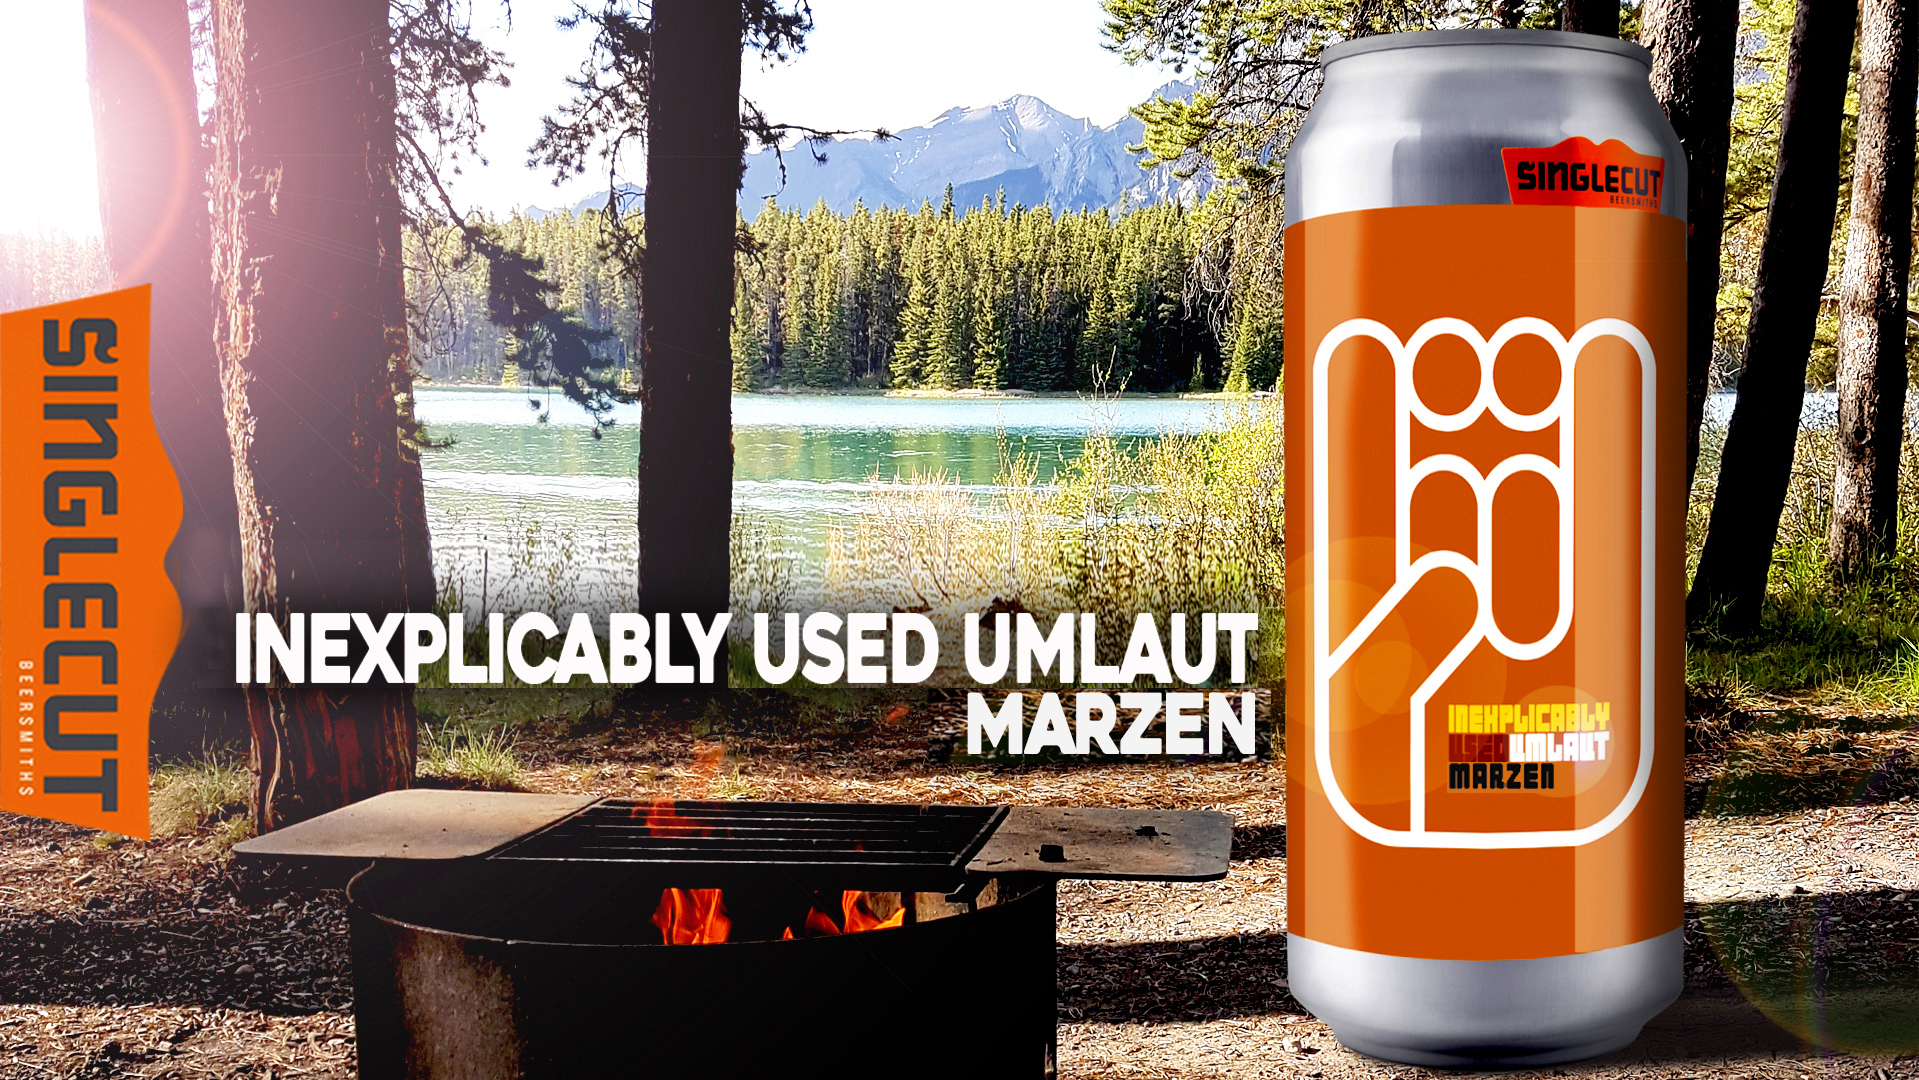 inexplicaly used umlaut marzen beer can in forest near lake with fire pit